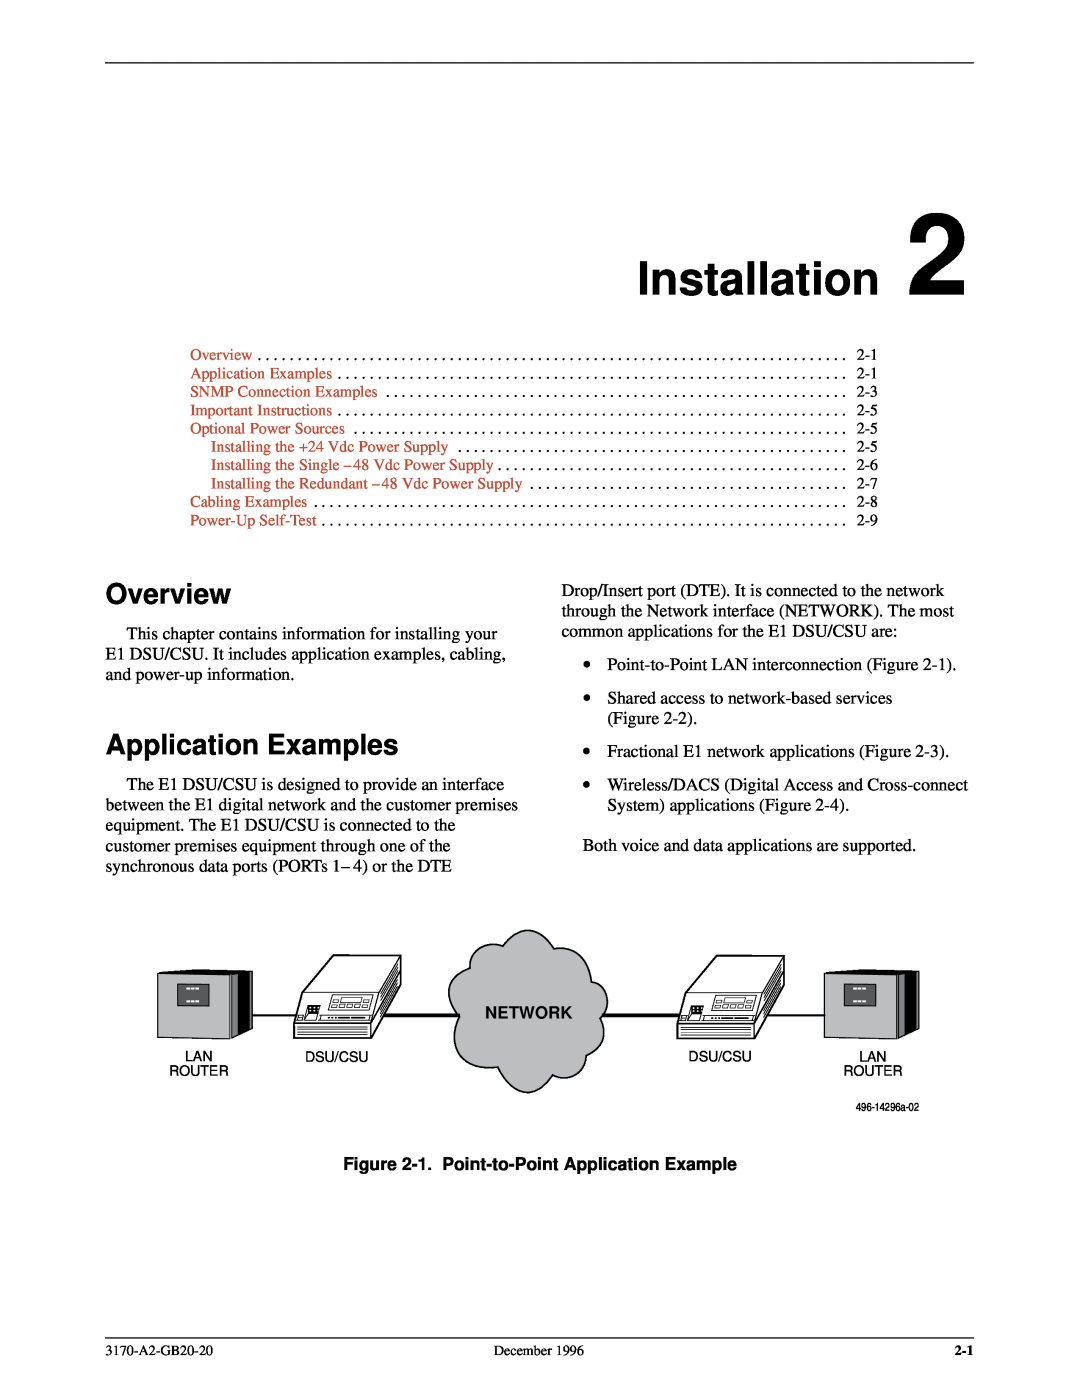 Paradyne 317x E1 manual Installation, Application Examples, Network, 1. Point-to-Point Application Example, Overview 